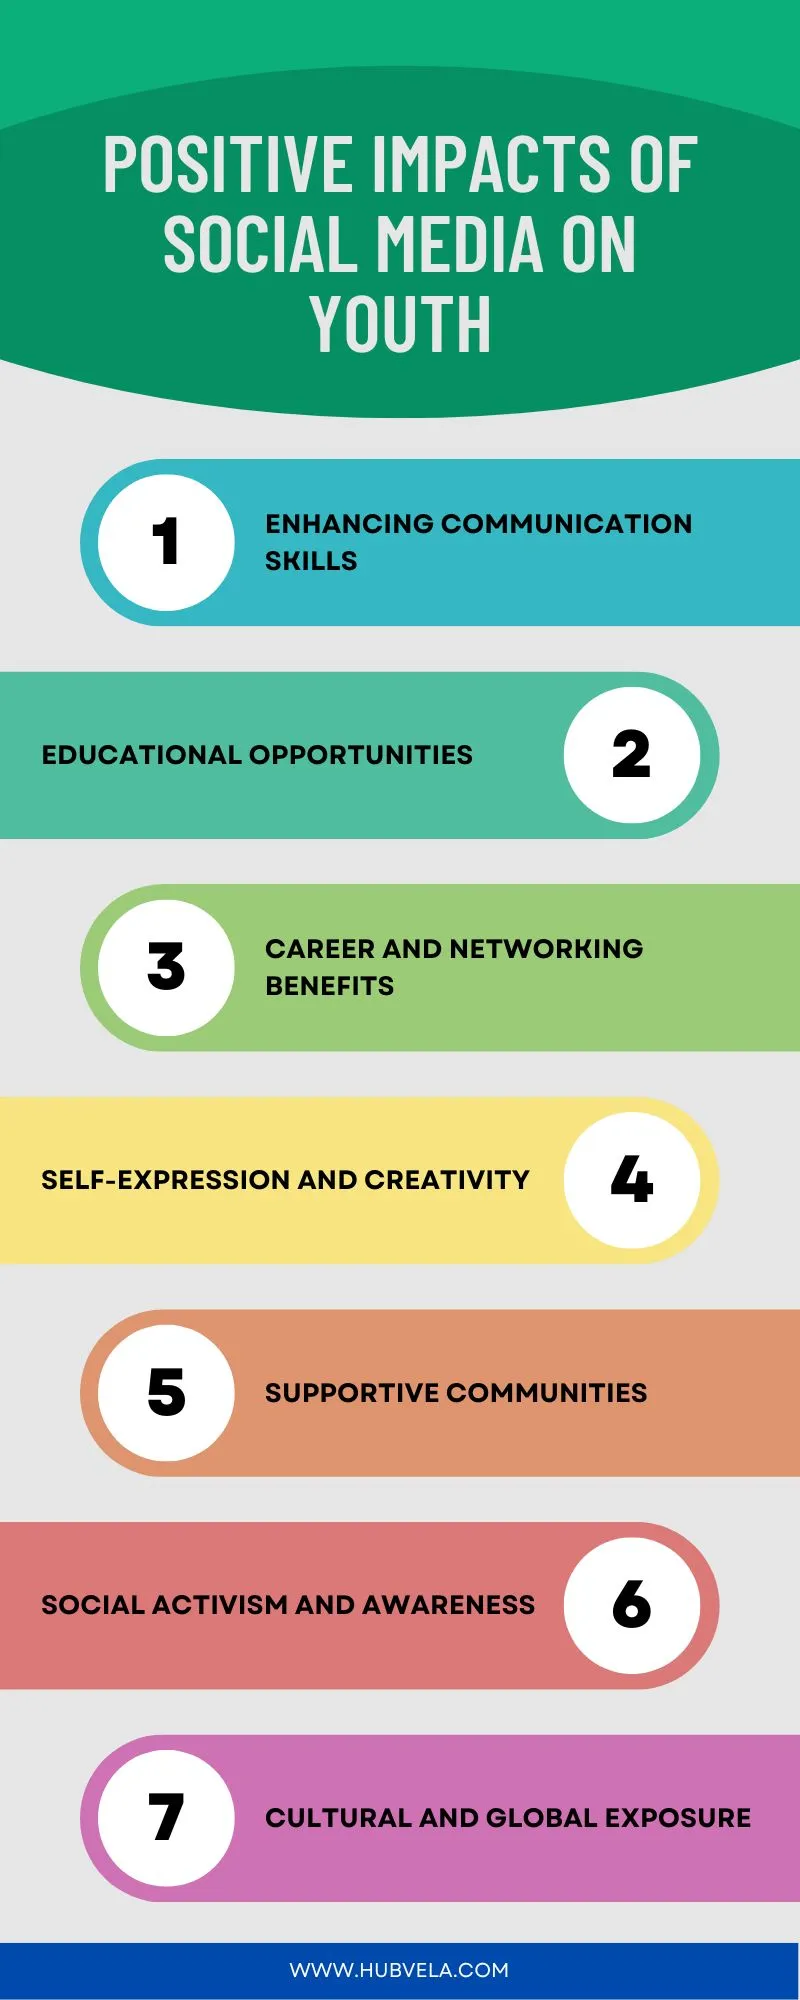 Positive Impacts of Social Media on Youth Infographic